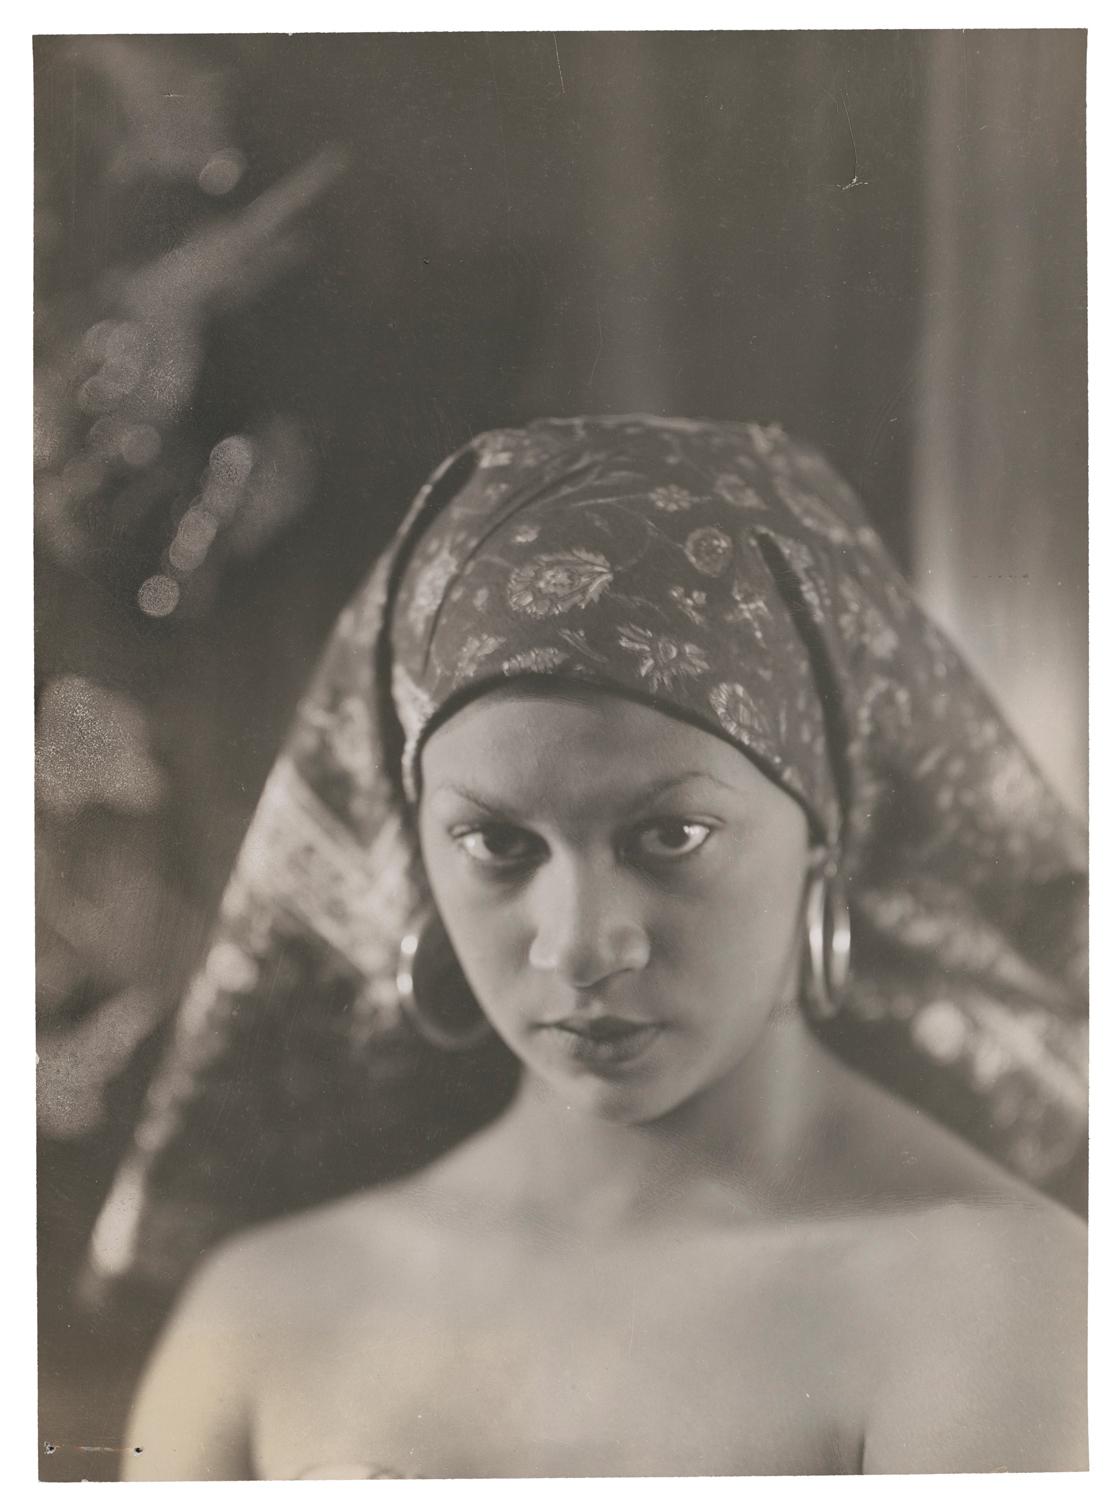 A woman wearing large hoop earrings and a headscarf looking directly into the camera. Black and white photograph by Violet Keene Perinchief.